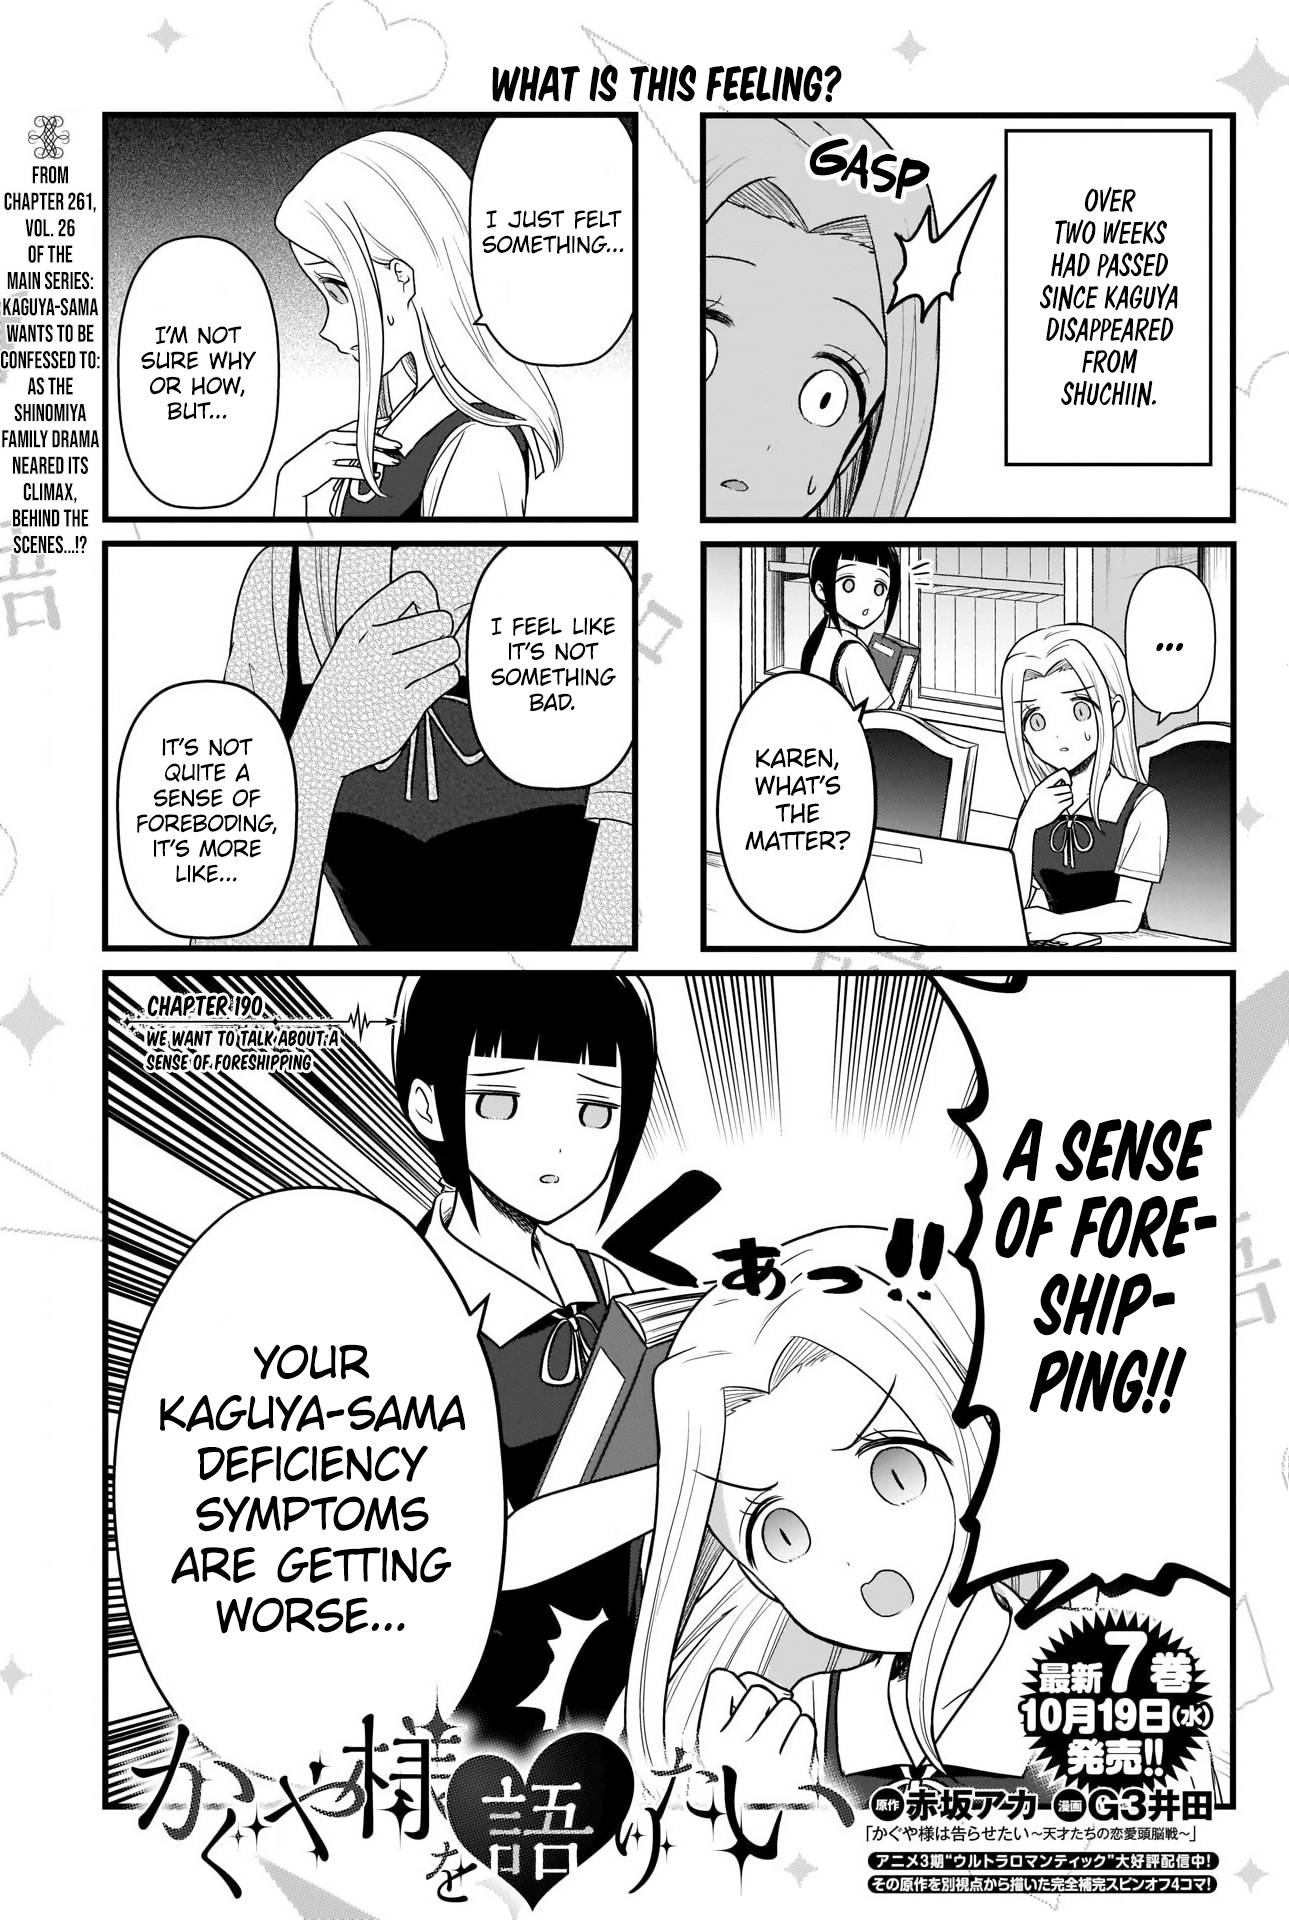 We Want to Talk About Kaguya - chapter 190 - #2